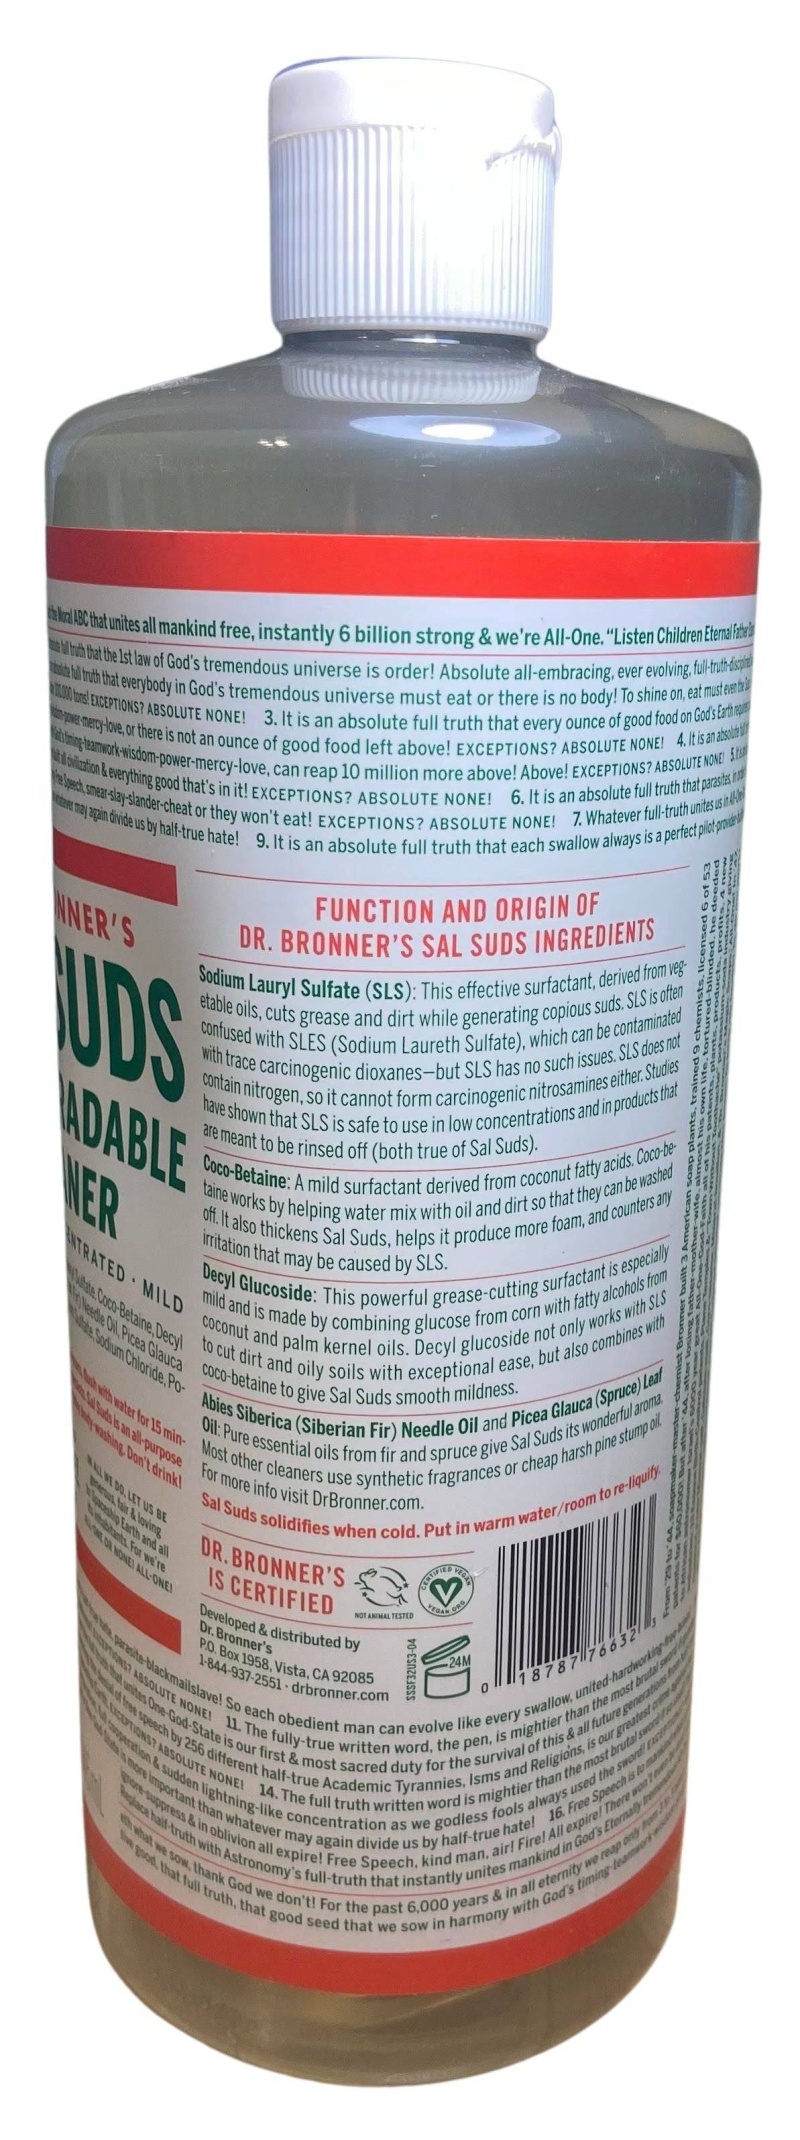 Biodegradable Cleaner, Concentrated, Sal Suds - 32 Oz